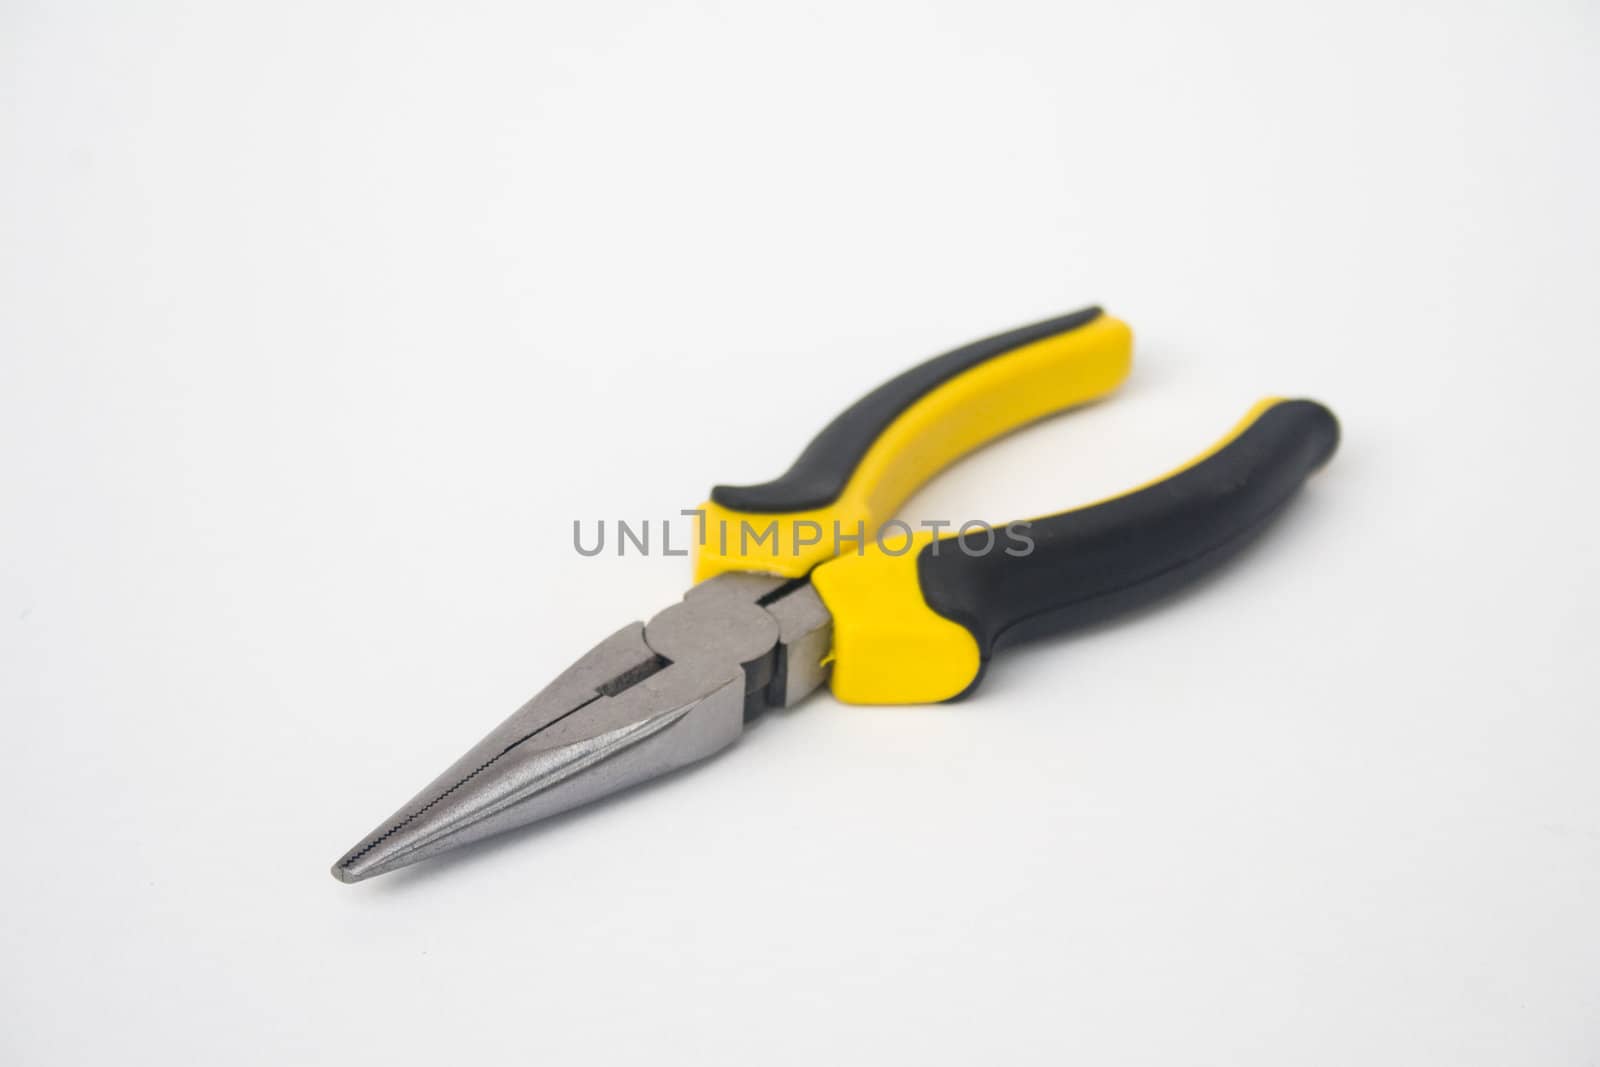 Needle nose pliers by timscottrom